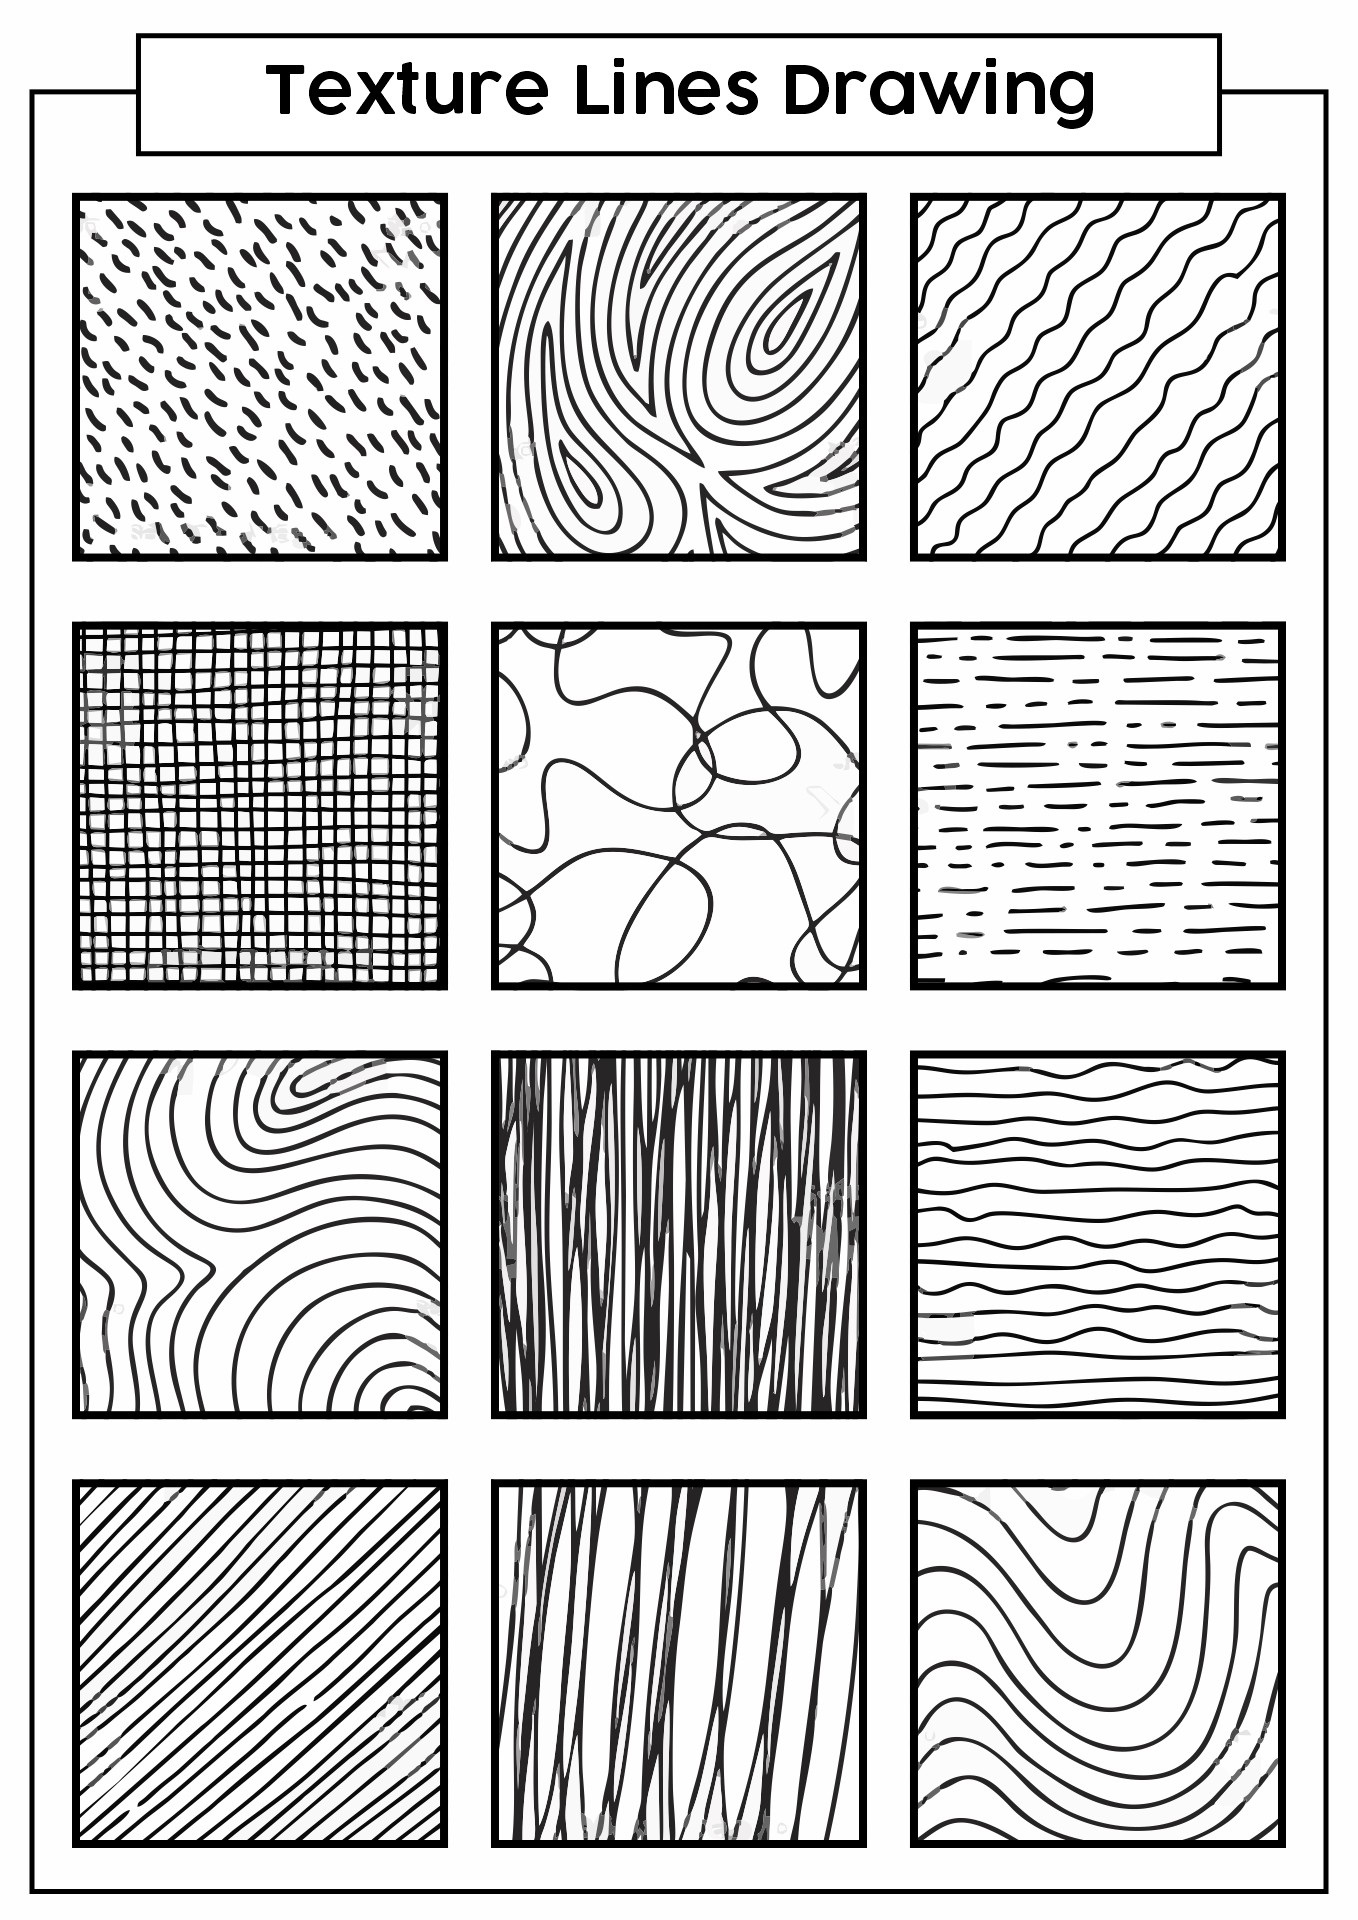 Texture Lines Drawing